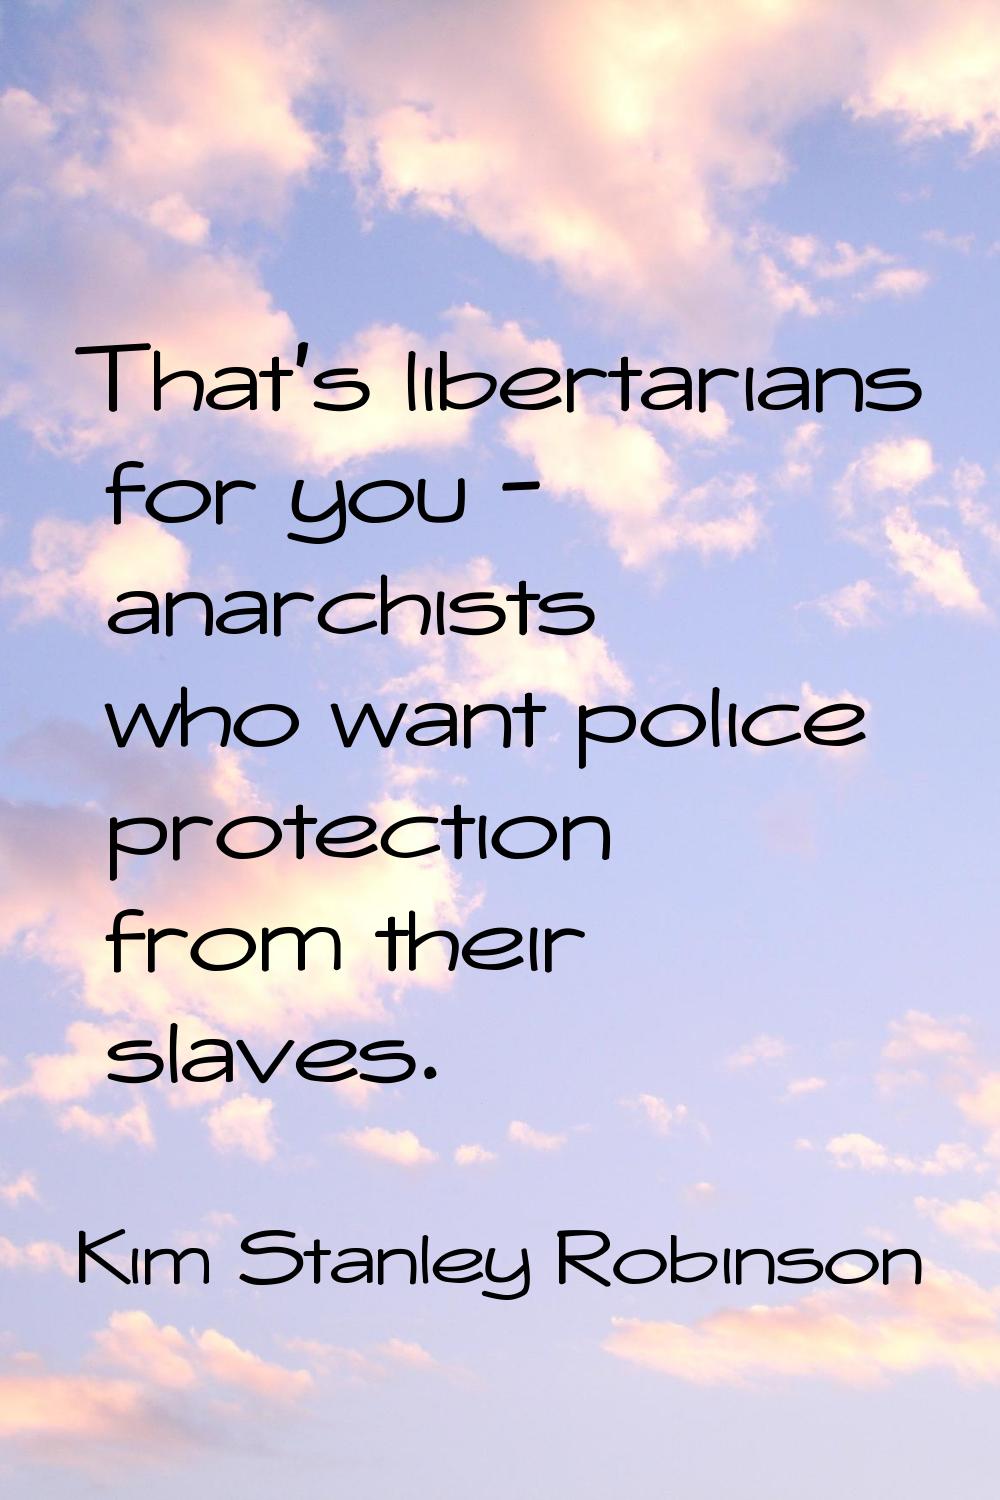 That's libertarians for you - anarchists who want police protection from their slaves.